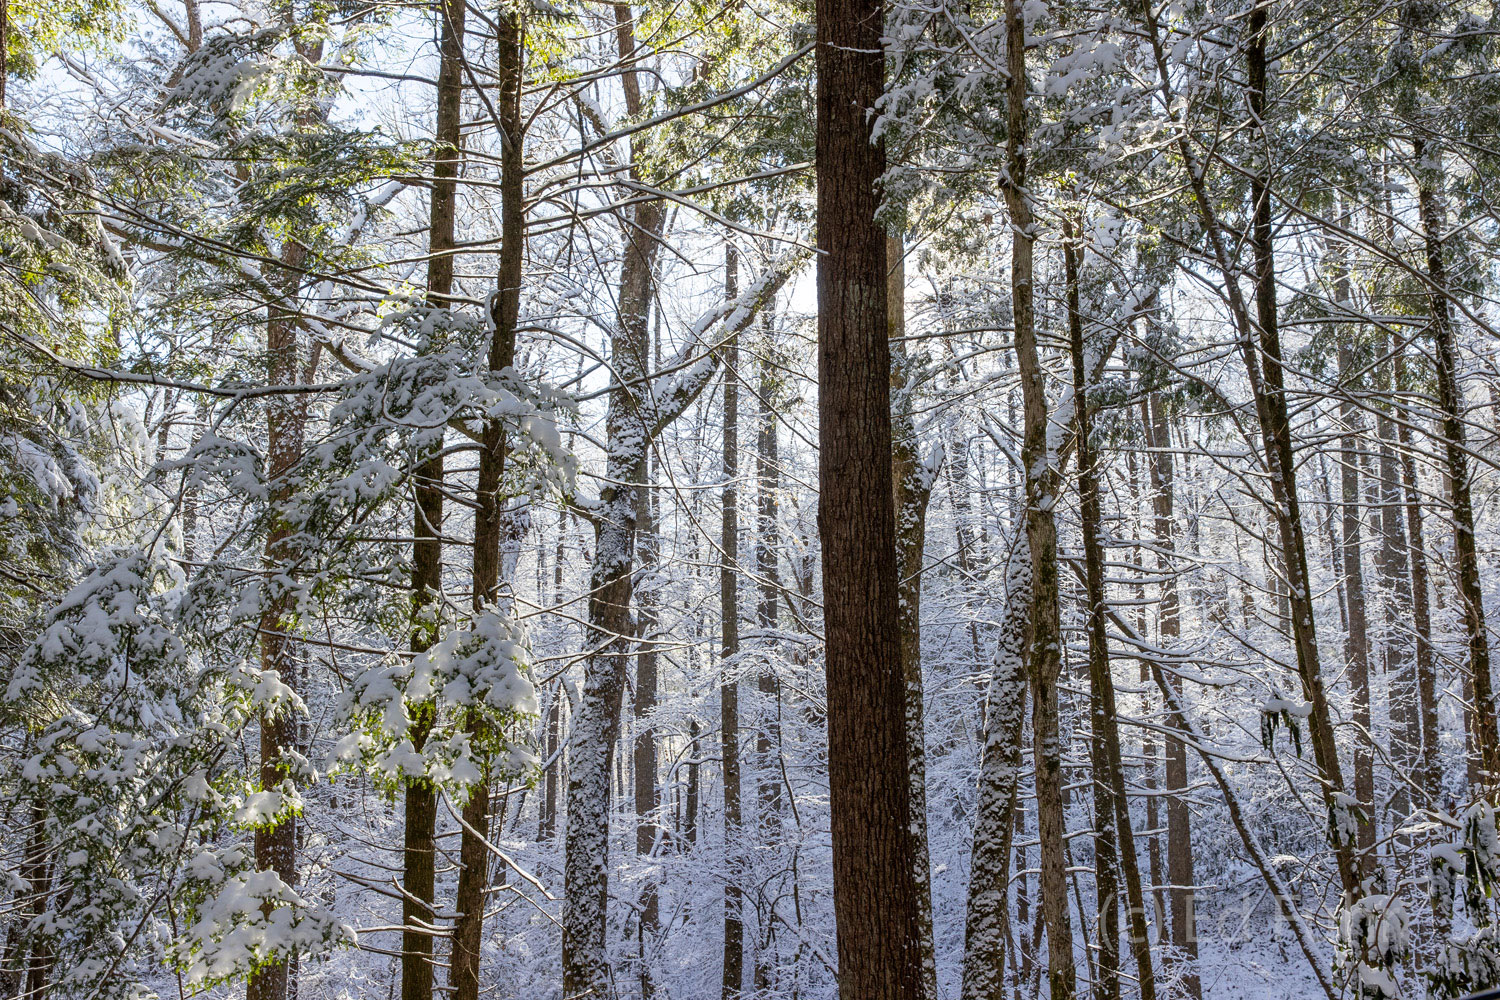 The woods have a new beauty under a fresh snow.